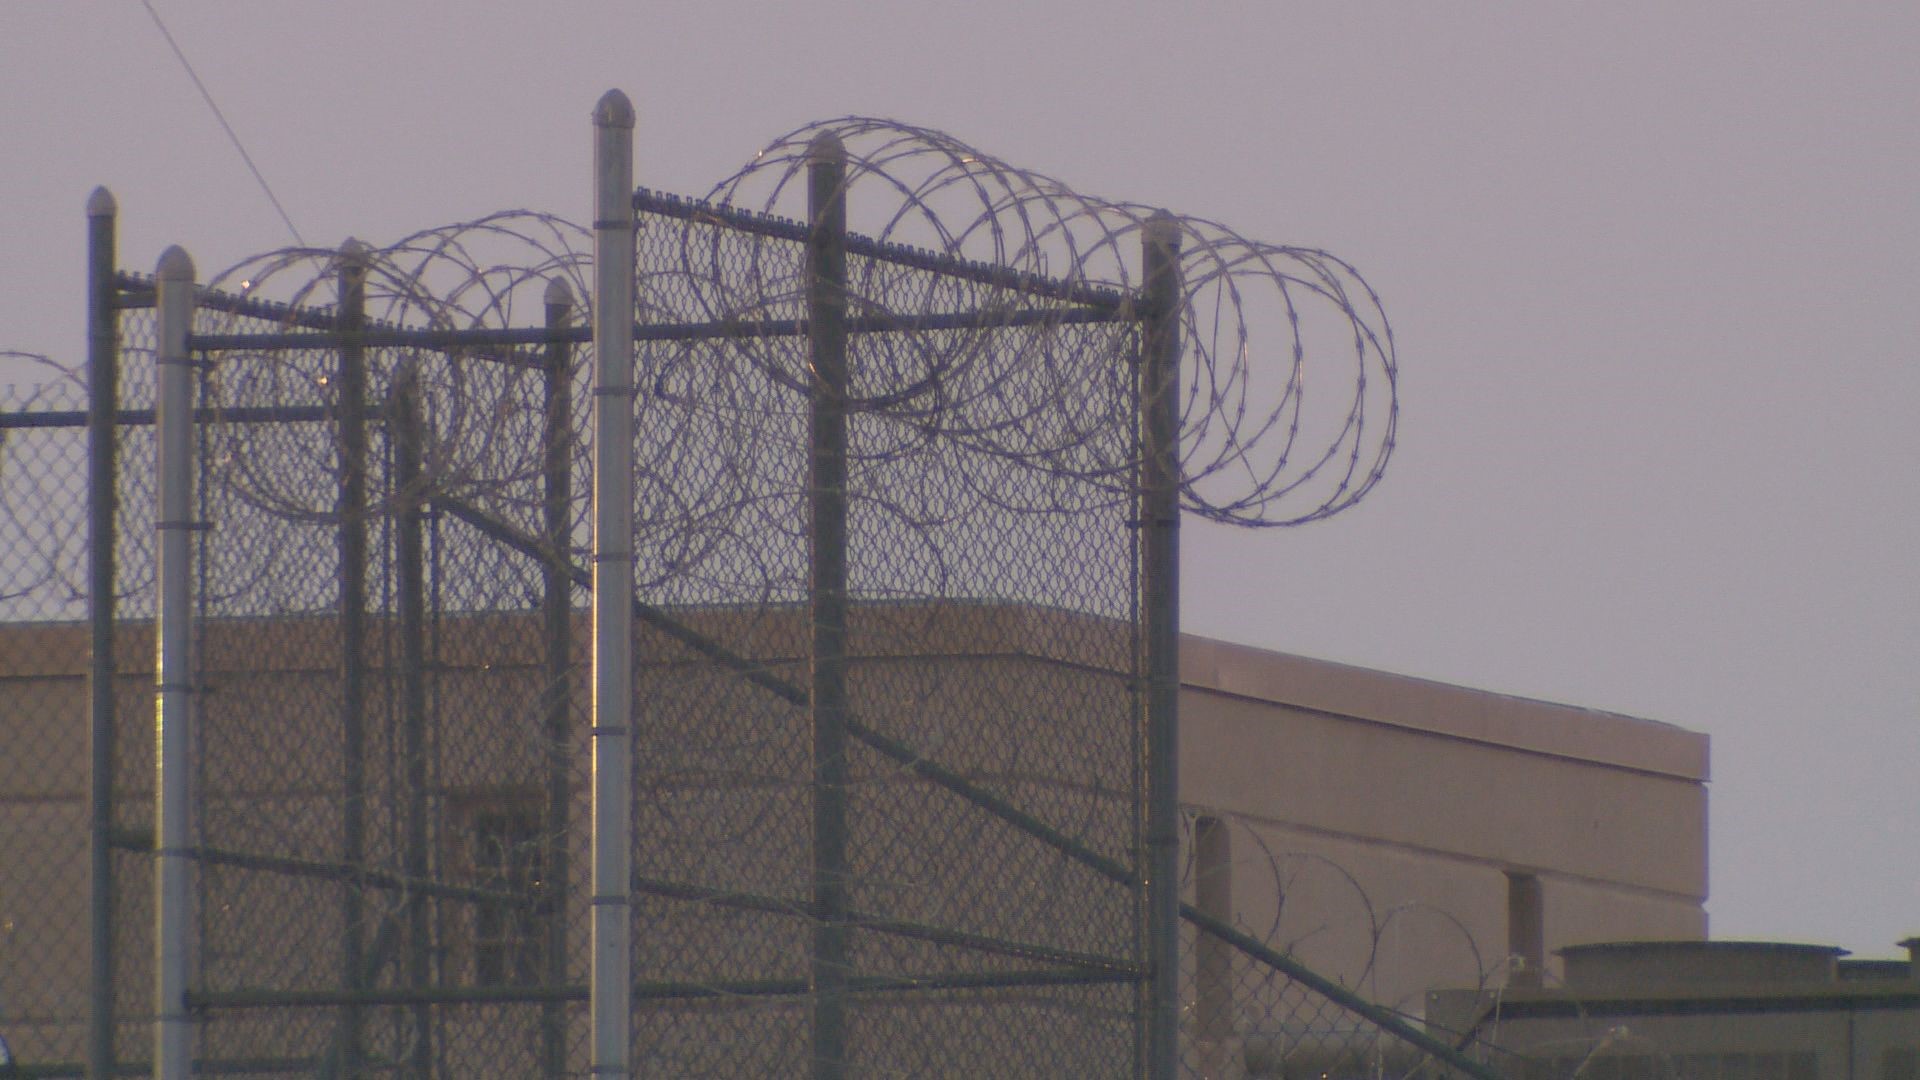 The Department of Corrections will temporarily stop telling police who’s being released from prison after the Greeley Police chief's criticism of the parole system.